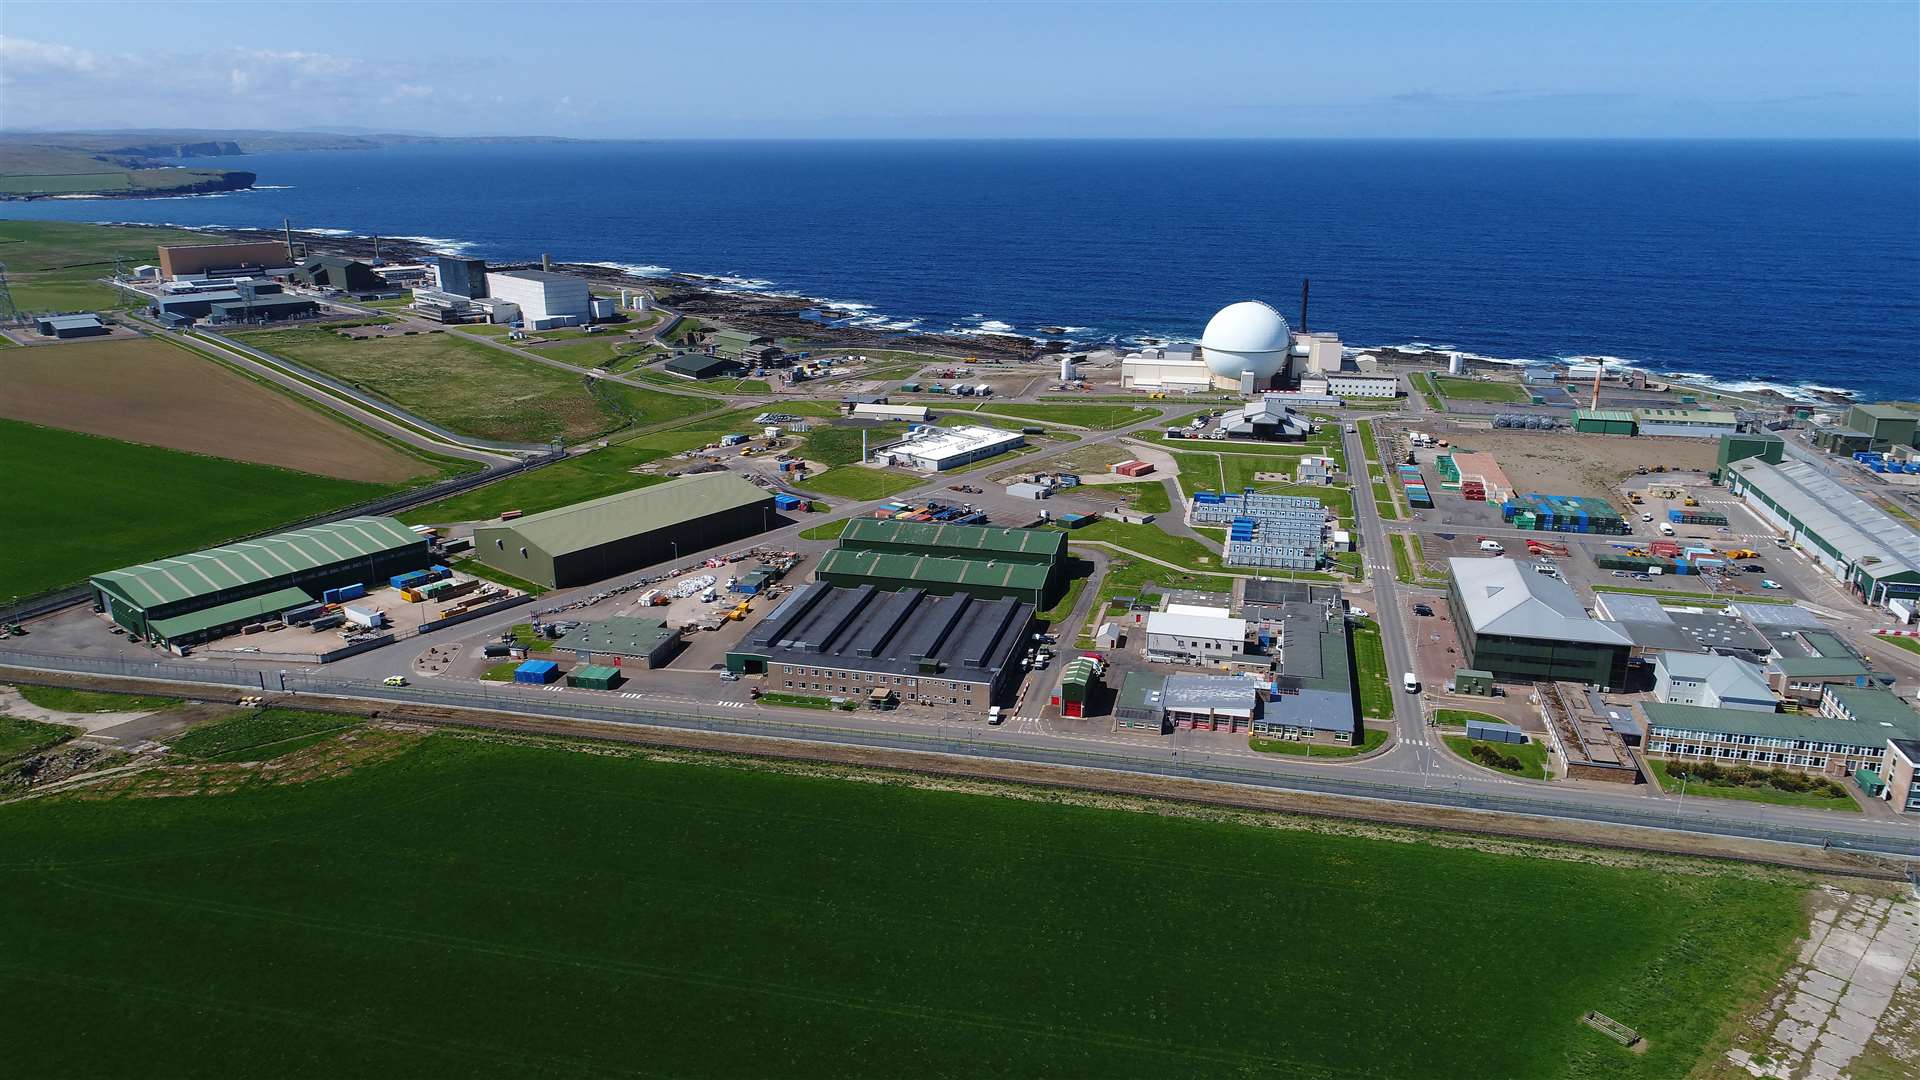 Jobs that attract people to Caithness and Sutherland post-Dounreay will be vital to stem depopulation. Picture: DSRL/NDA